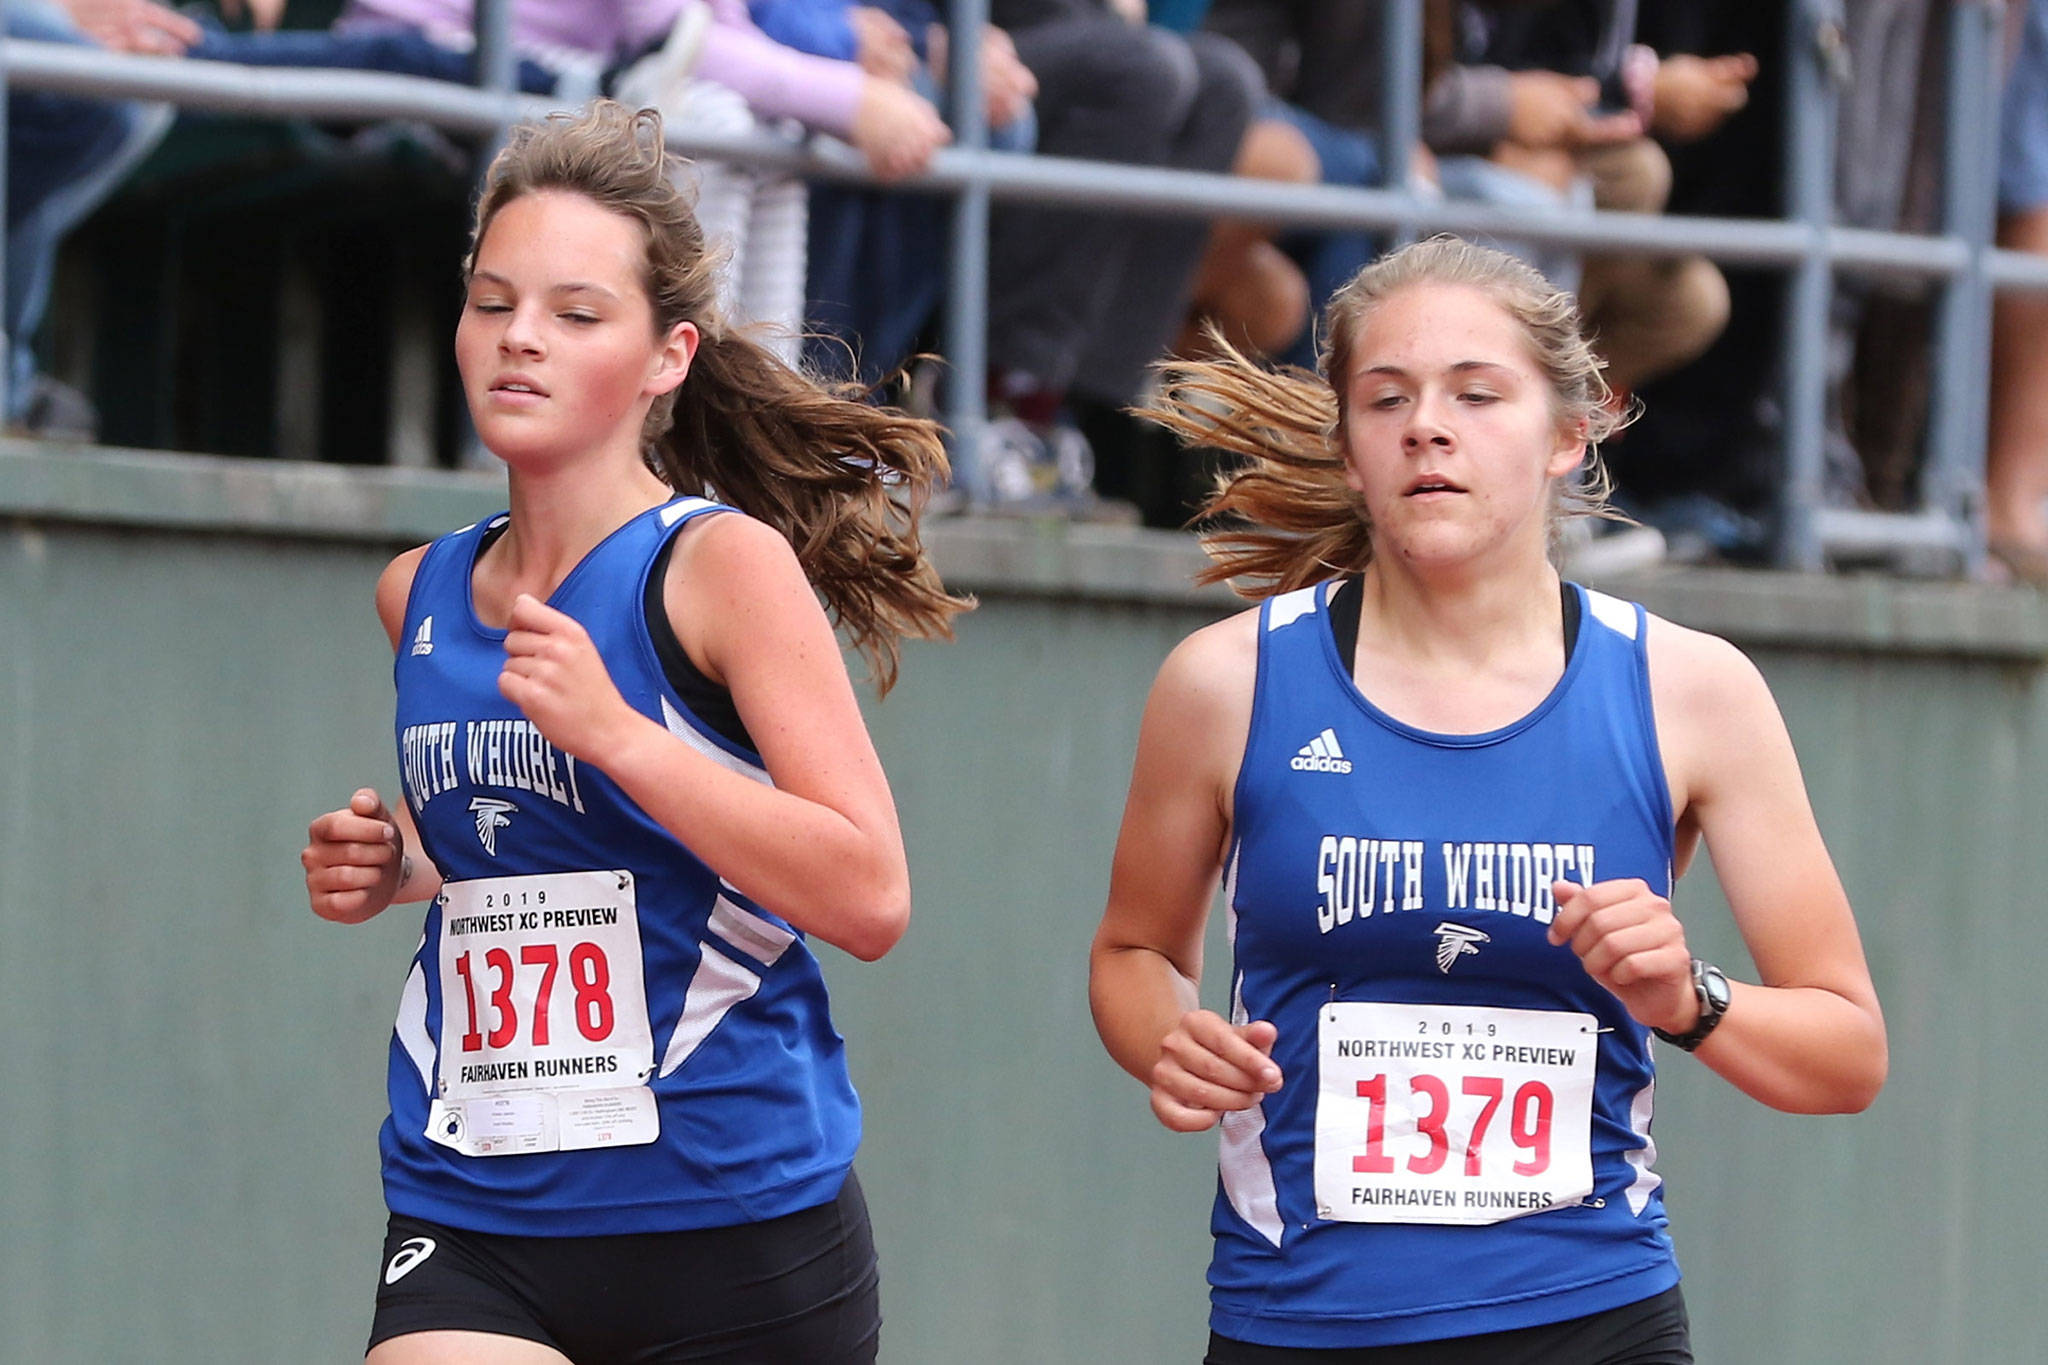 South Whidbey’s Jasmin Graner, left, and Grace Huffman run together toward the finish line at the Sehome Invitational. (Photo by John Fisken)